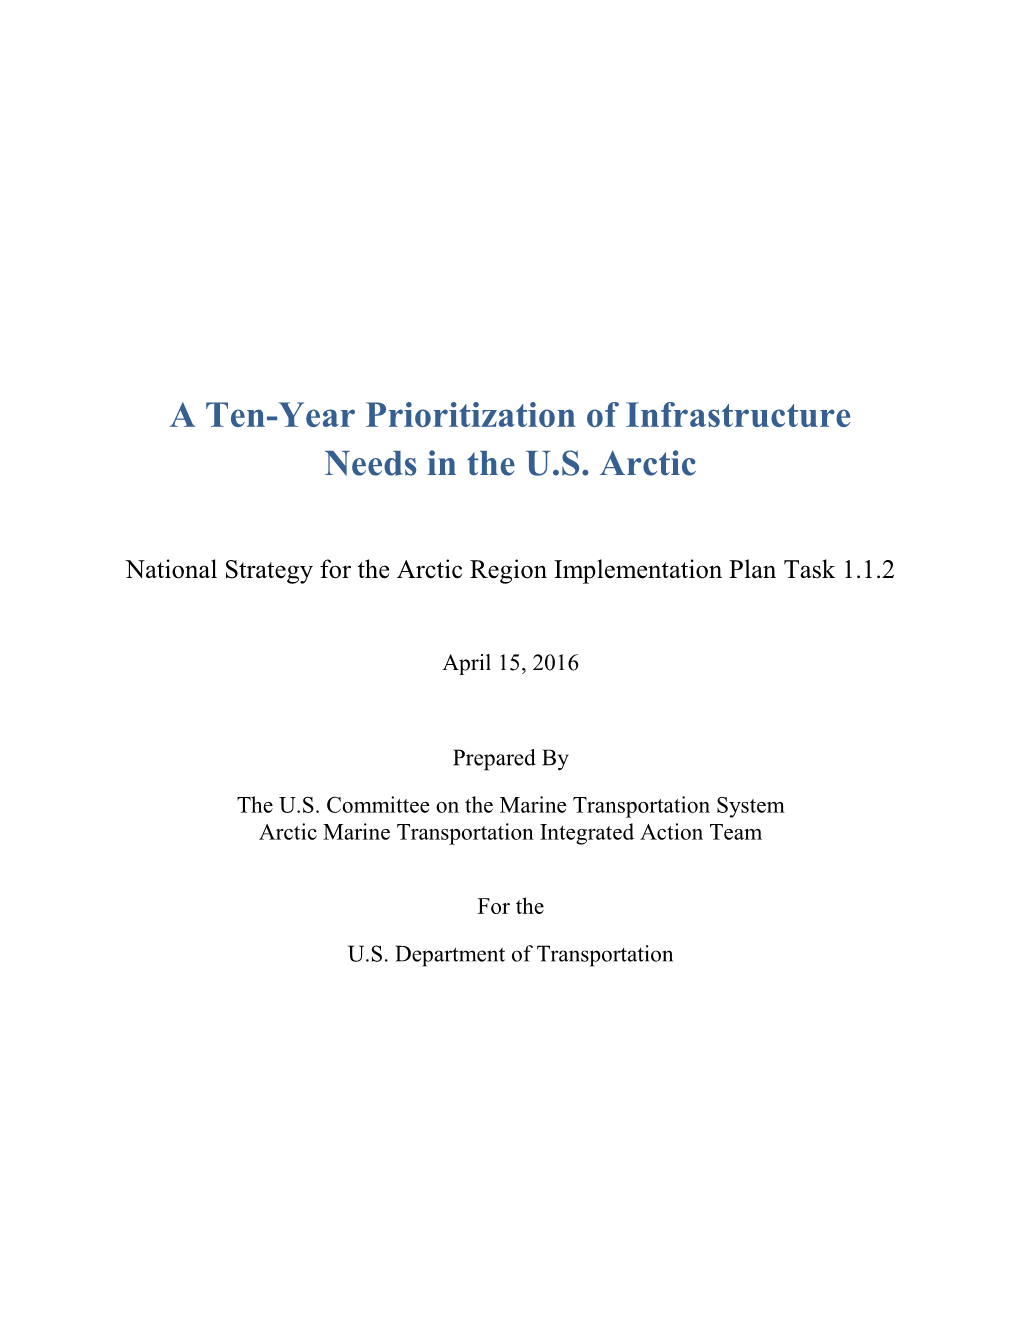 A Ten-Year Prioritization of Infrastructure Needs in the U.S. Arctic